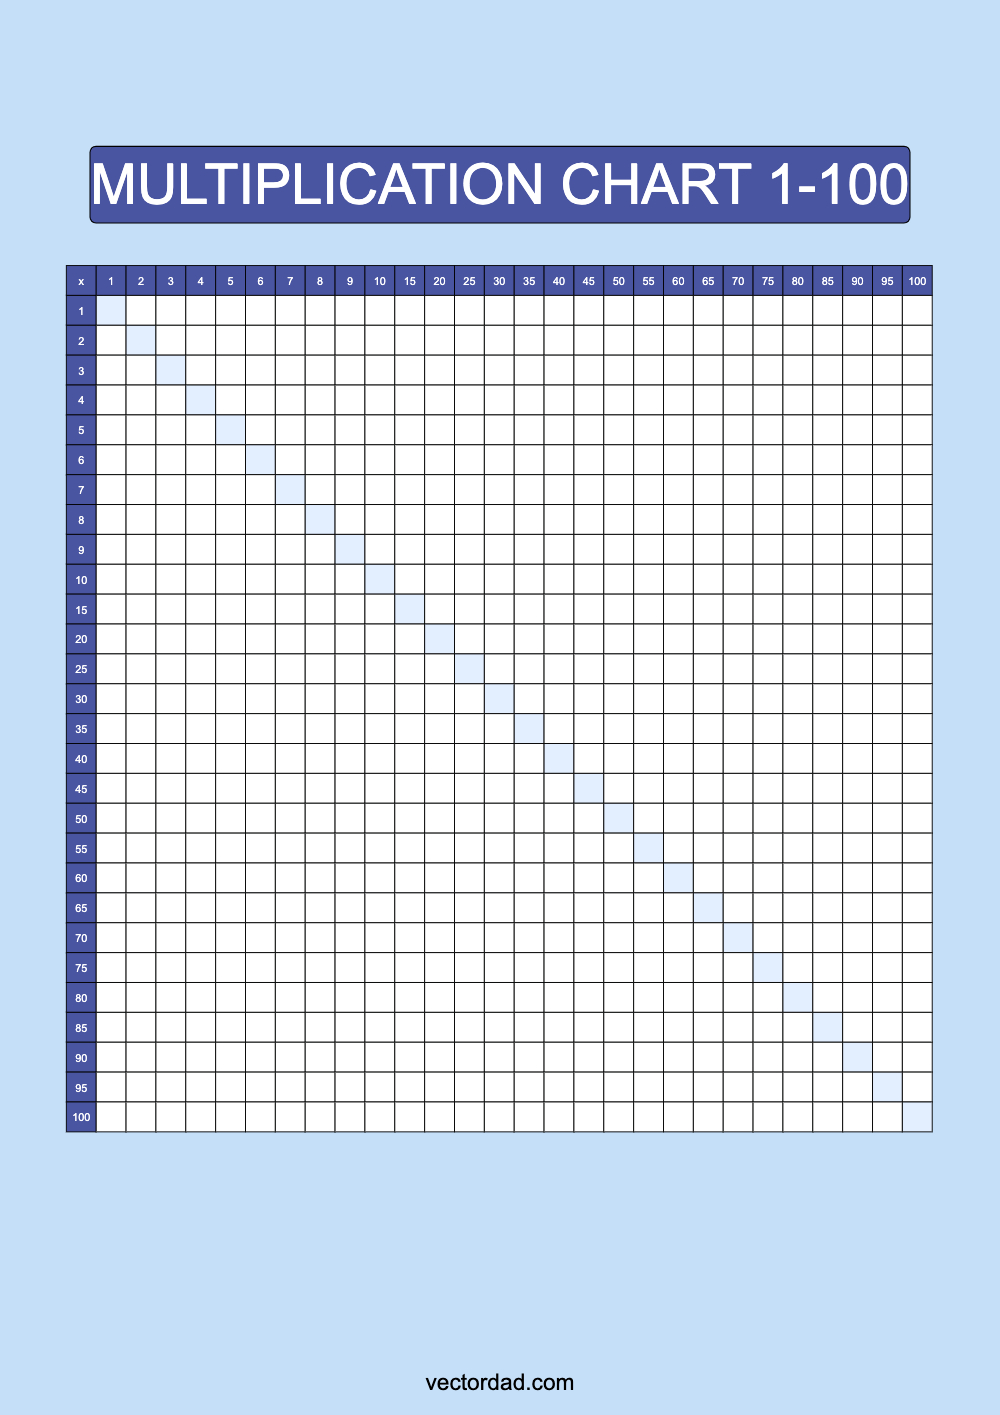 Blank Blue Multiplication Chart Printable 1 to 100 portrait Free, high quality, times table, sheet, pdf, svg, png, jpeg, svg, png, jpeg, blank, empty, 3rd grade, 4th grade, 5th grade, template, print, download, online, vertical